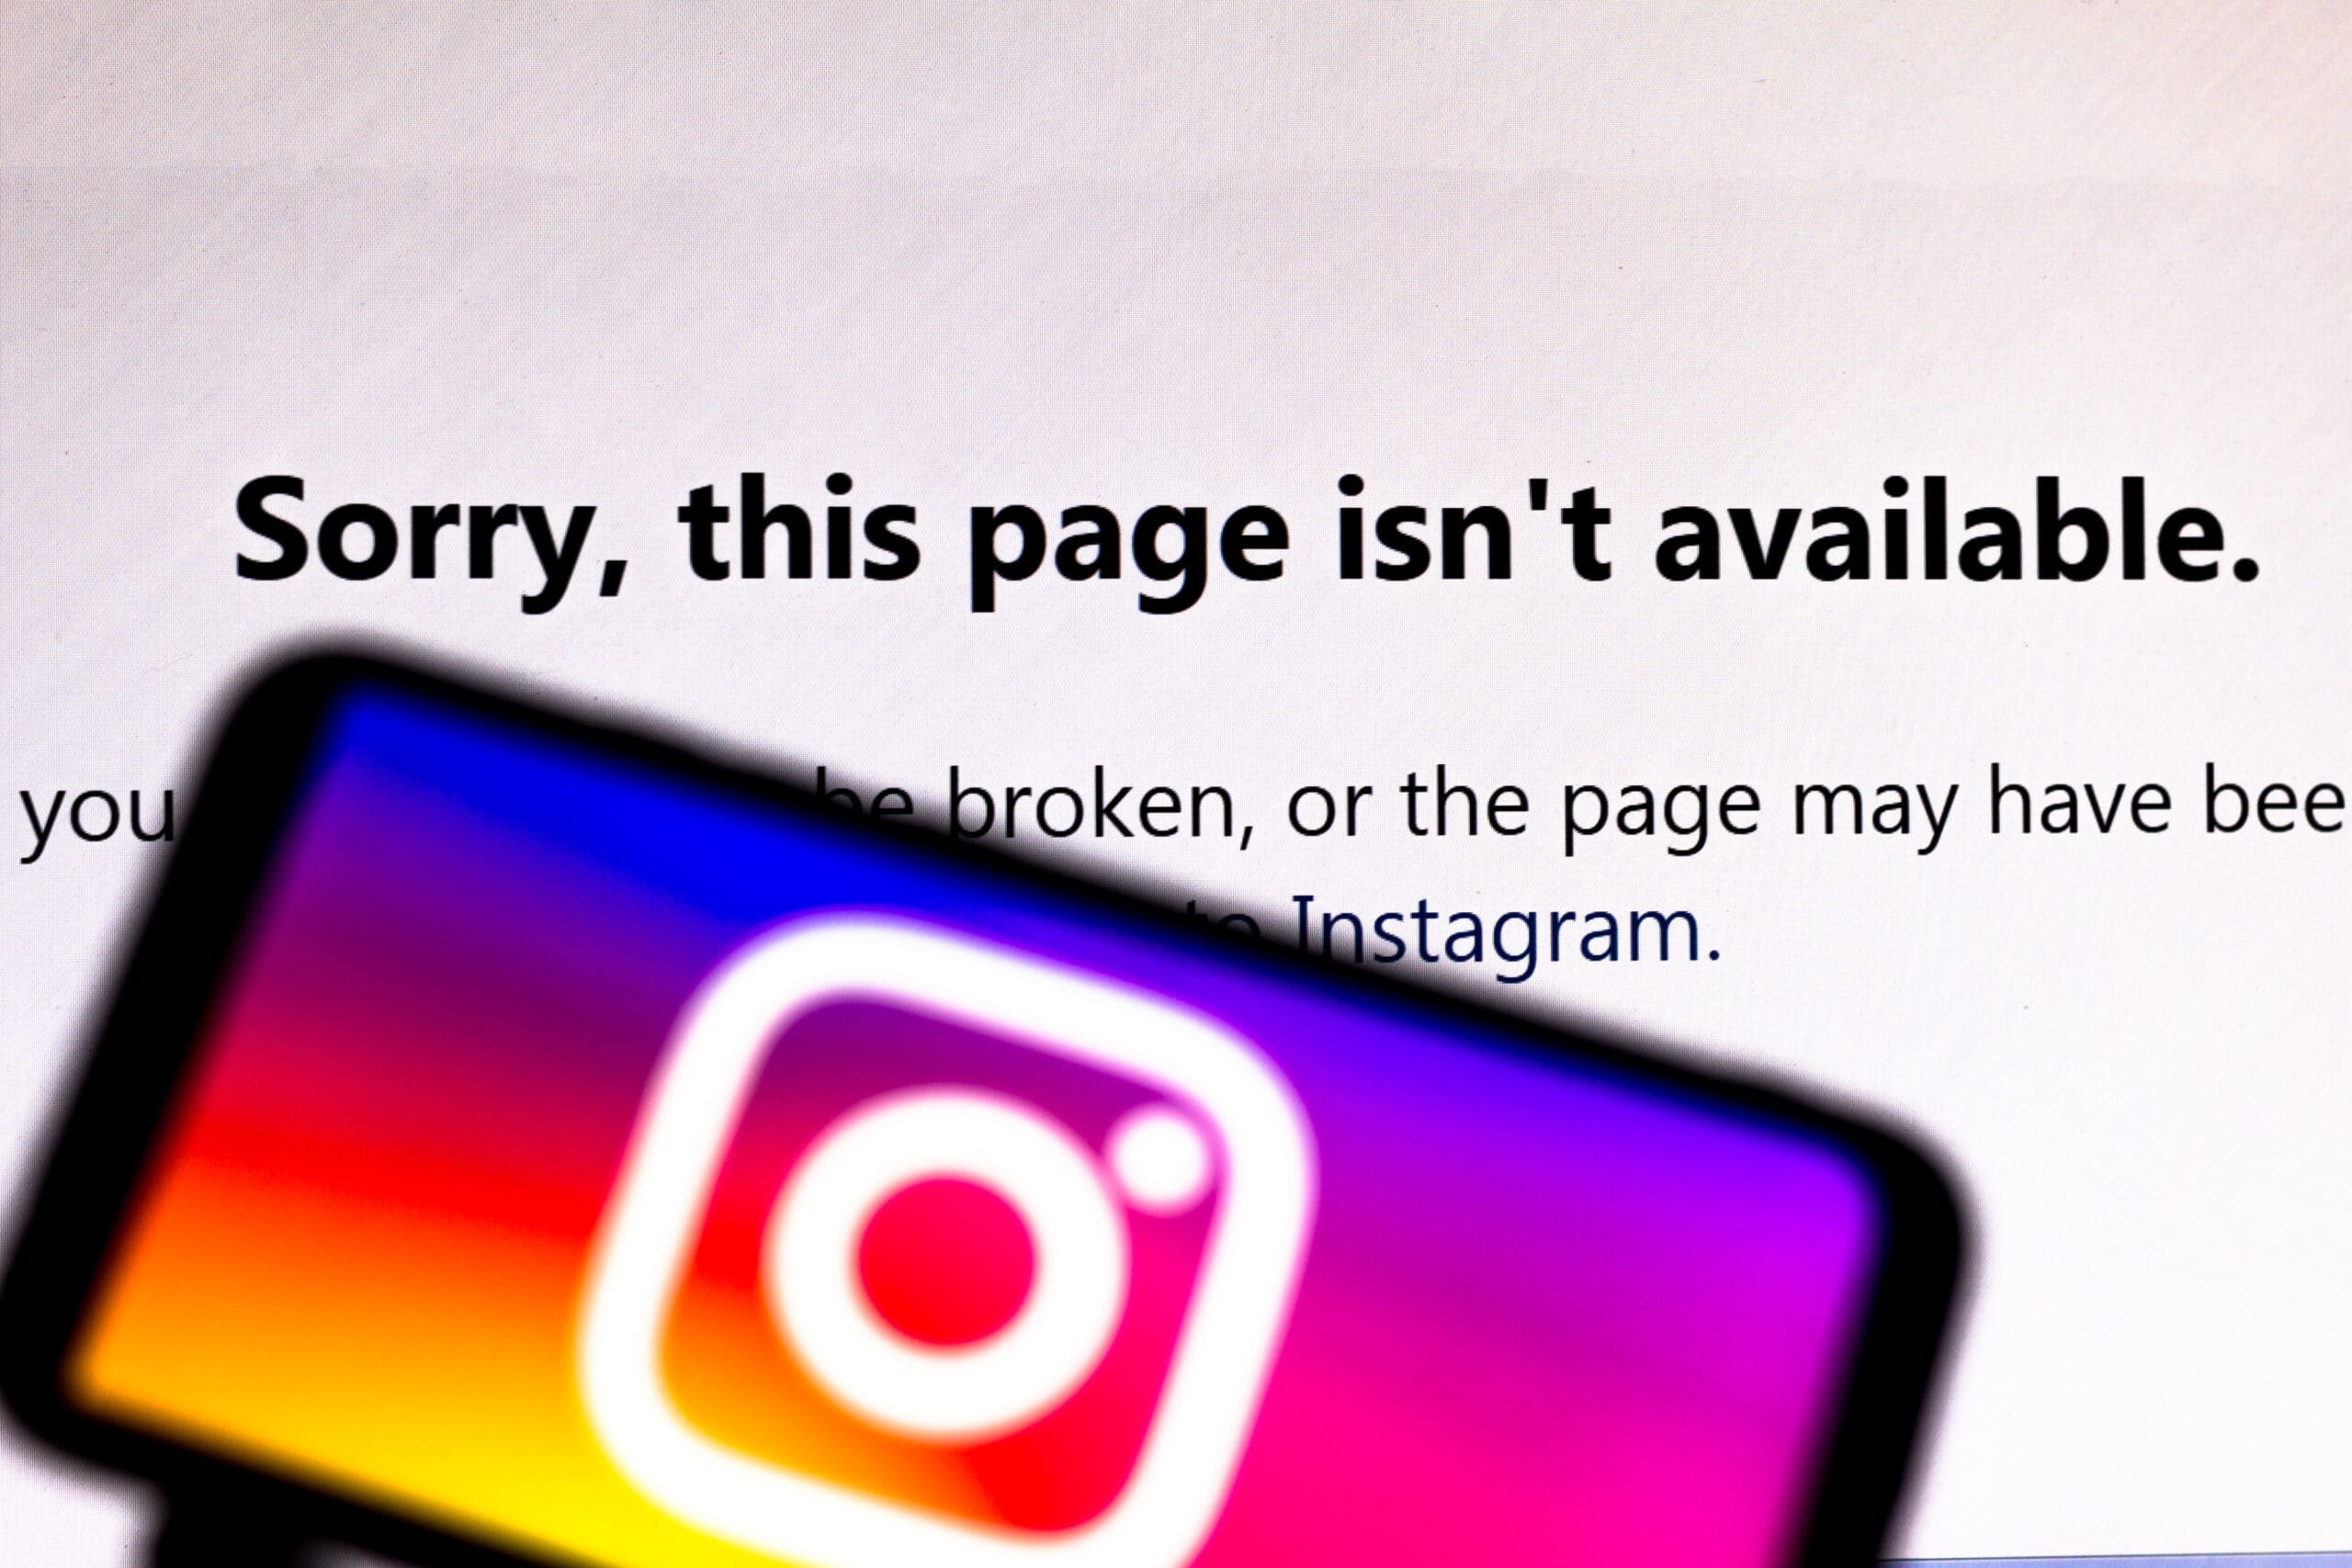 Learn how to make sure someone blocks you on Instagram